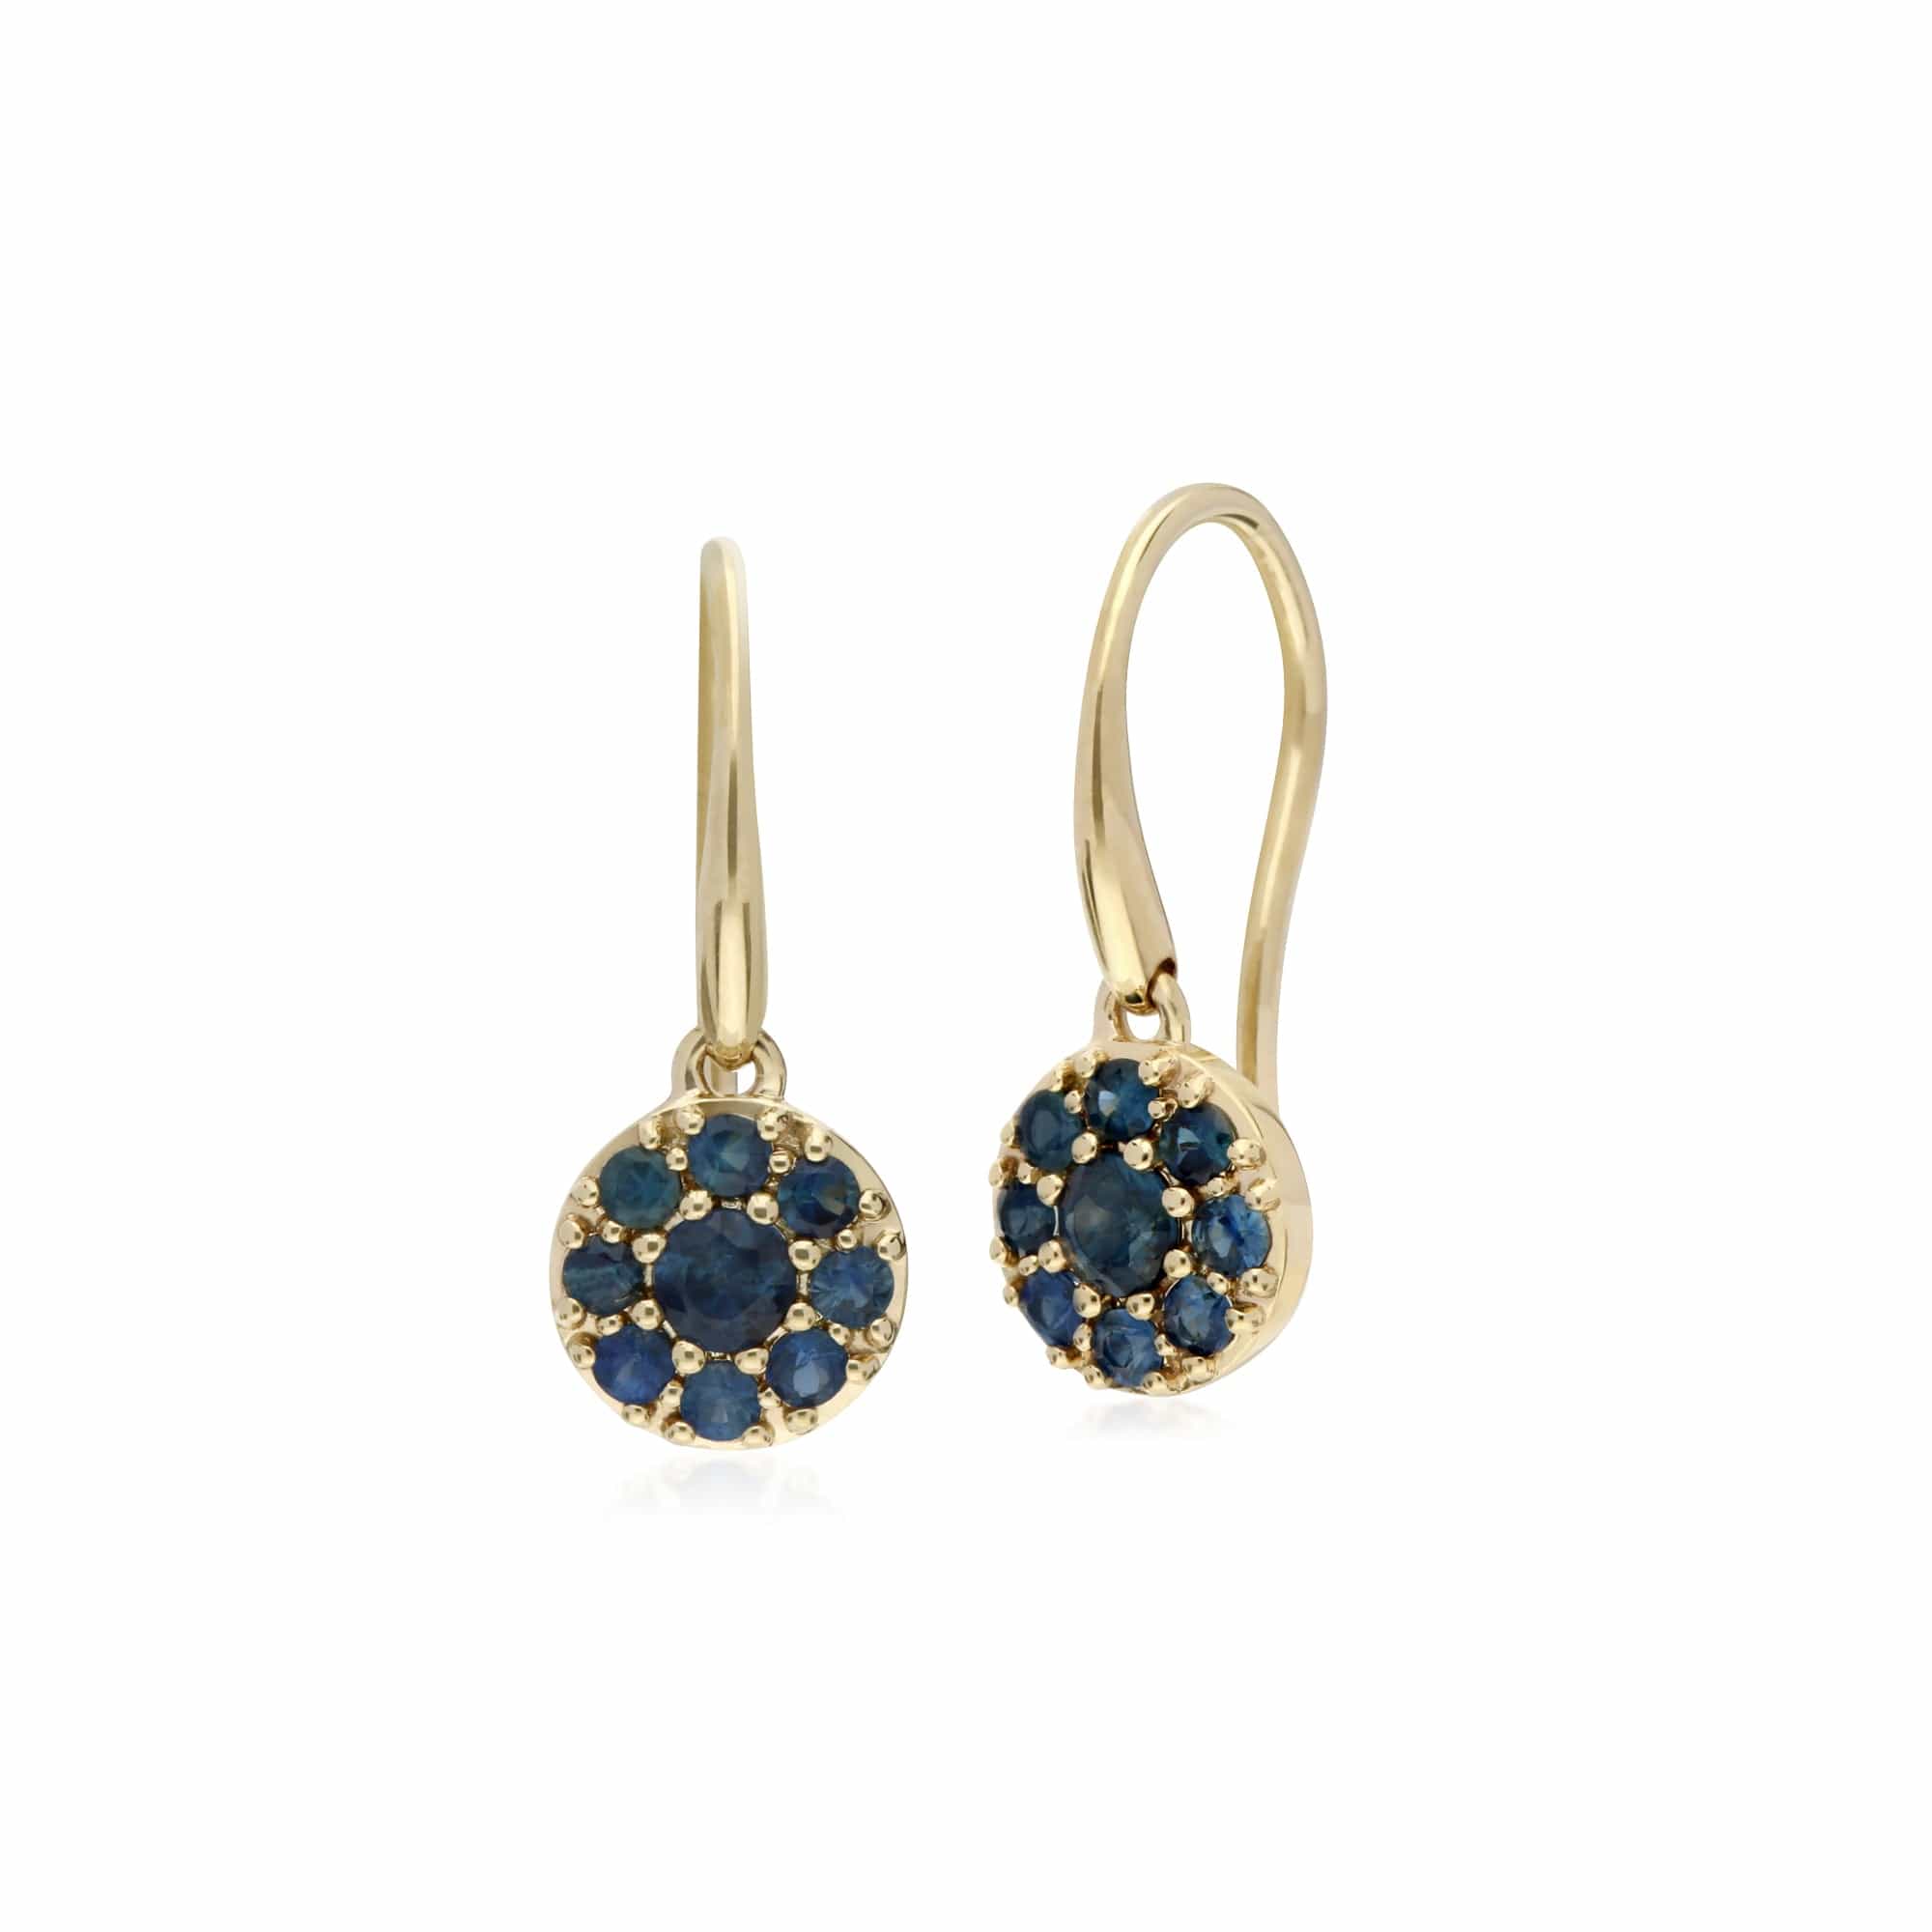 Cluster Round Sapphire Circle Fish Hook Drop Earrings in 9ct Yellow Gold - Gemondo